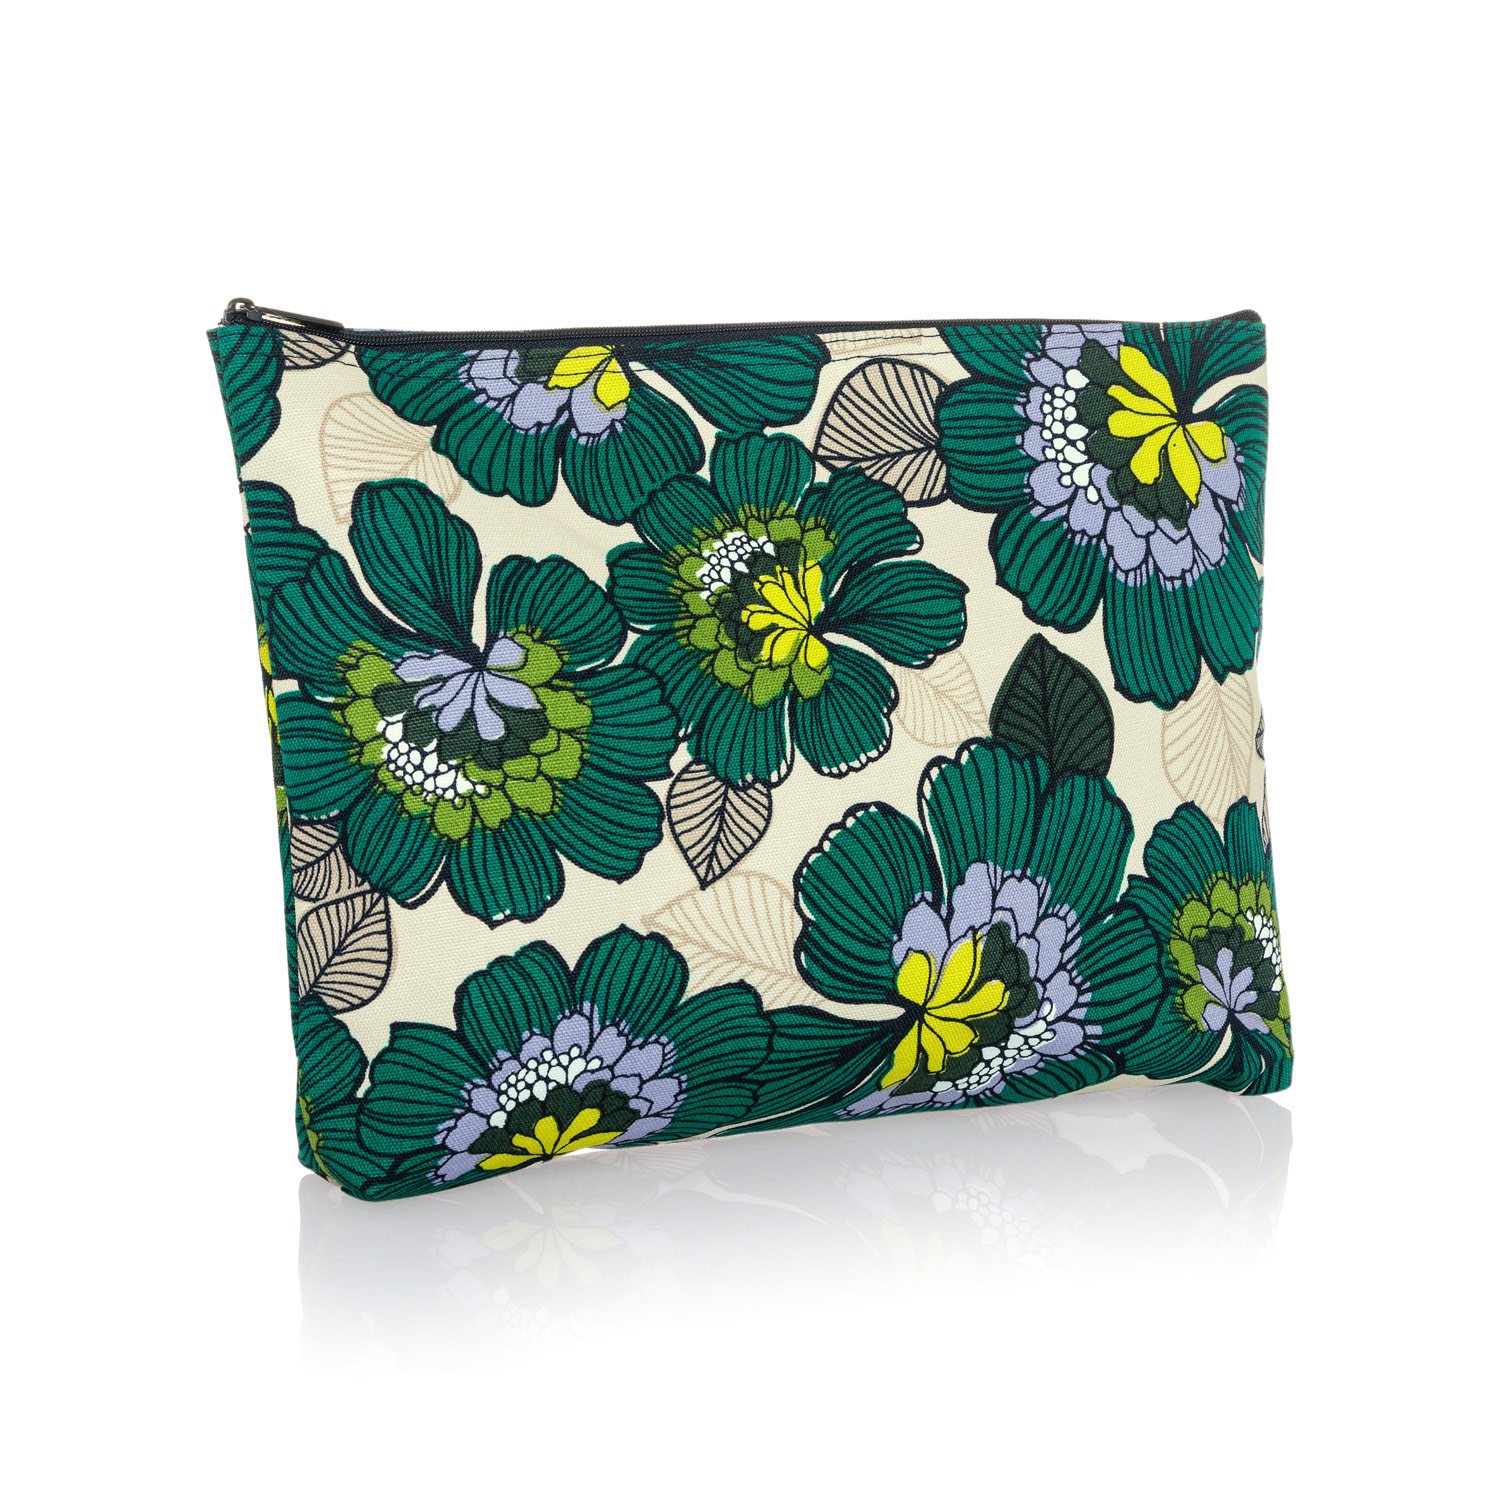 Garden Party - Zipper Pouch - Thirty-One Gifts - Affordable Purses, Totes & Bags